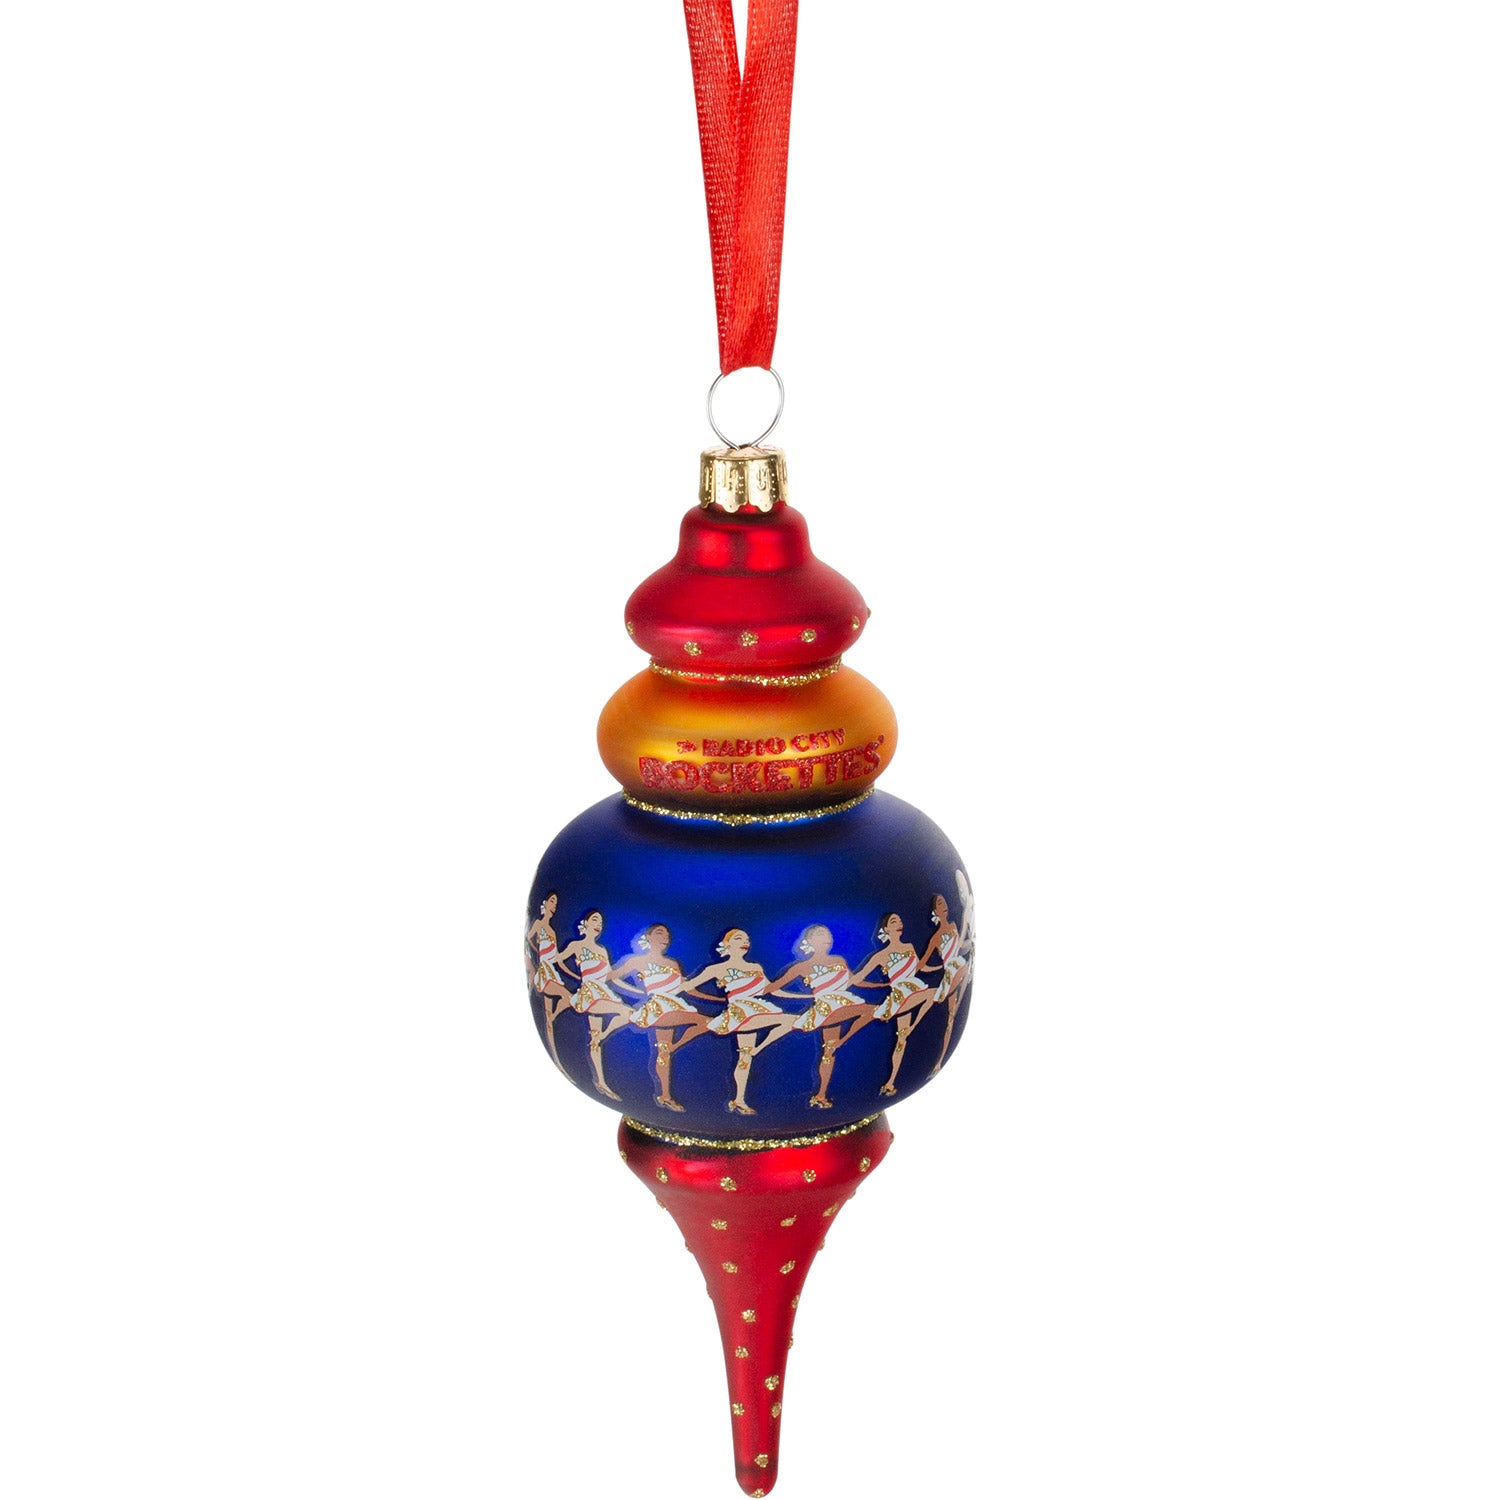 2021 Dated Ornament In Blue, Red & Gold - Front View